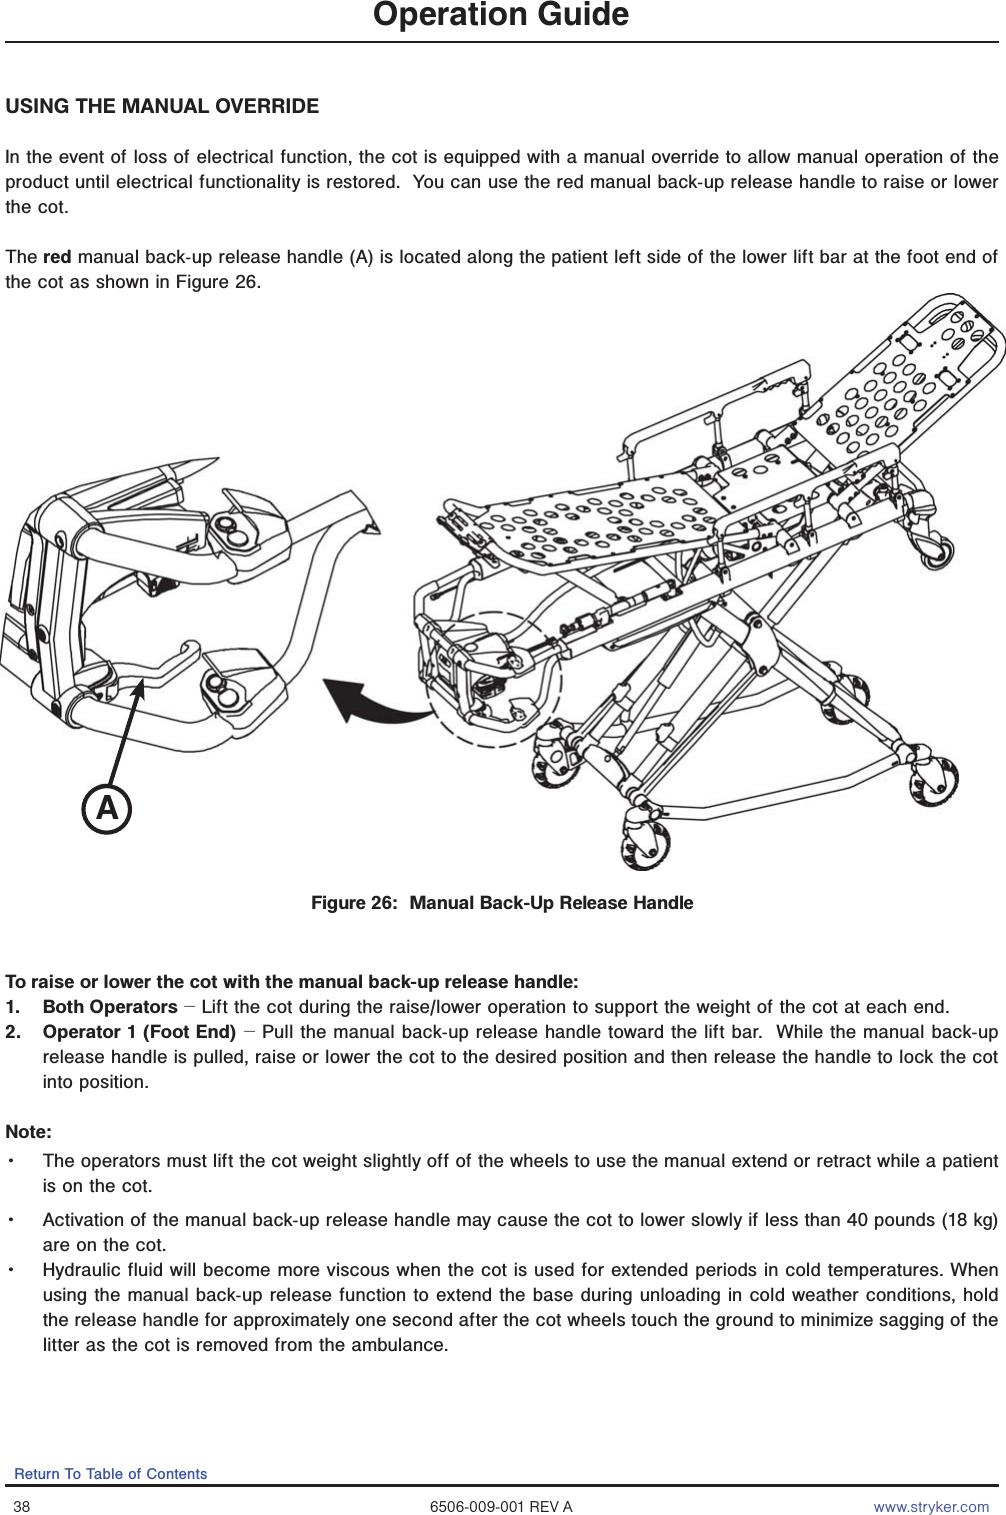 38 6506-009-001 REV A www.stryker.comReturn To Table of ContentsOperation GuideUSING THE MANUAL OVERRIDEIn the event of loss of electrical function, the cot is equipped with a manual override to allow manual operation of the product until electrical functionality is restored.  You can use the red manual back-up release handle to raise or lower the cot.The red manual back-up release handle (A) is located along the patient left side of the lower lift bar at the foot end of the cot as shown in Figure 26. To raise or lower the cot with the manual back-up release handle:1. Both Operators − Lift the cot during the raise/lower operation to support the weight of the cot at each end.  2.  Operator 1 (Foot End) − Pull the manual back-up release handle toward the lift bar.  While the manual back-up release handle is pulled, raise or lower the cot to the desired position and then release the handle to lock the cot into position.Note:  Ǩɣ The operators must lift the cot weight slightly off of the wheels to use the manual extend or retract while a patient is on the cot. Ǩɣ Activation of the manual back-up release handle may cause the cot to lower slowly if less than 40 pounds (18 kg) are on the cot.Ǩɣ Hydraulic fluid will become more viscous when the cot is used for extended periods in cold temperatures. When using the manual back-up release function to extend the base during unloading in cold weather conditions, hold the release handle for approximately one second after the cot wheels touch the ground to minimize sagging of the litter as the cot is removed from the ambulance.Figure 26:  Manual Back-Up Release HandleA